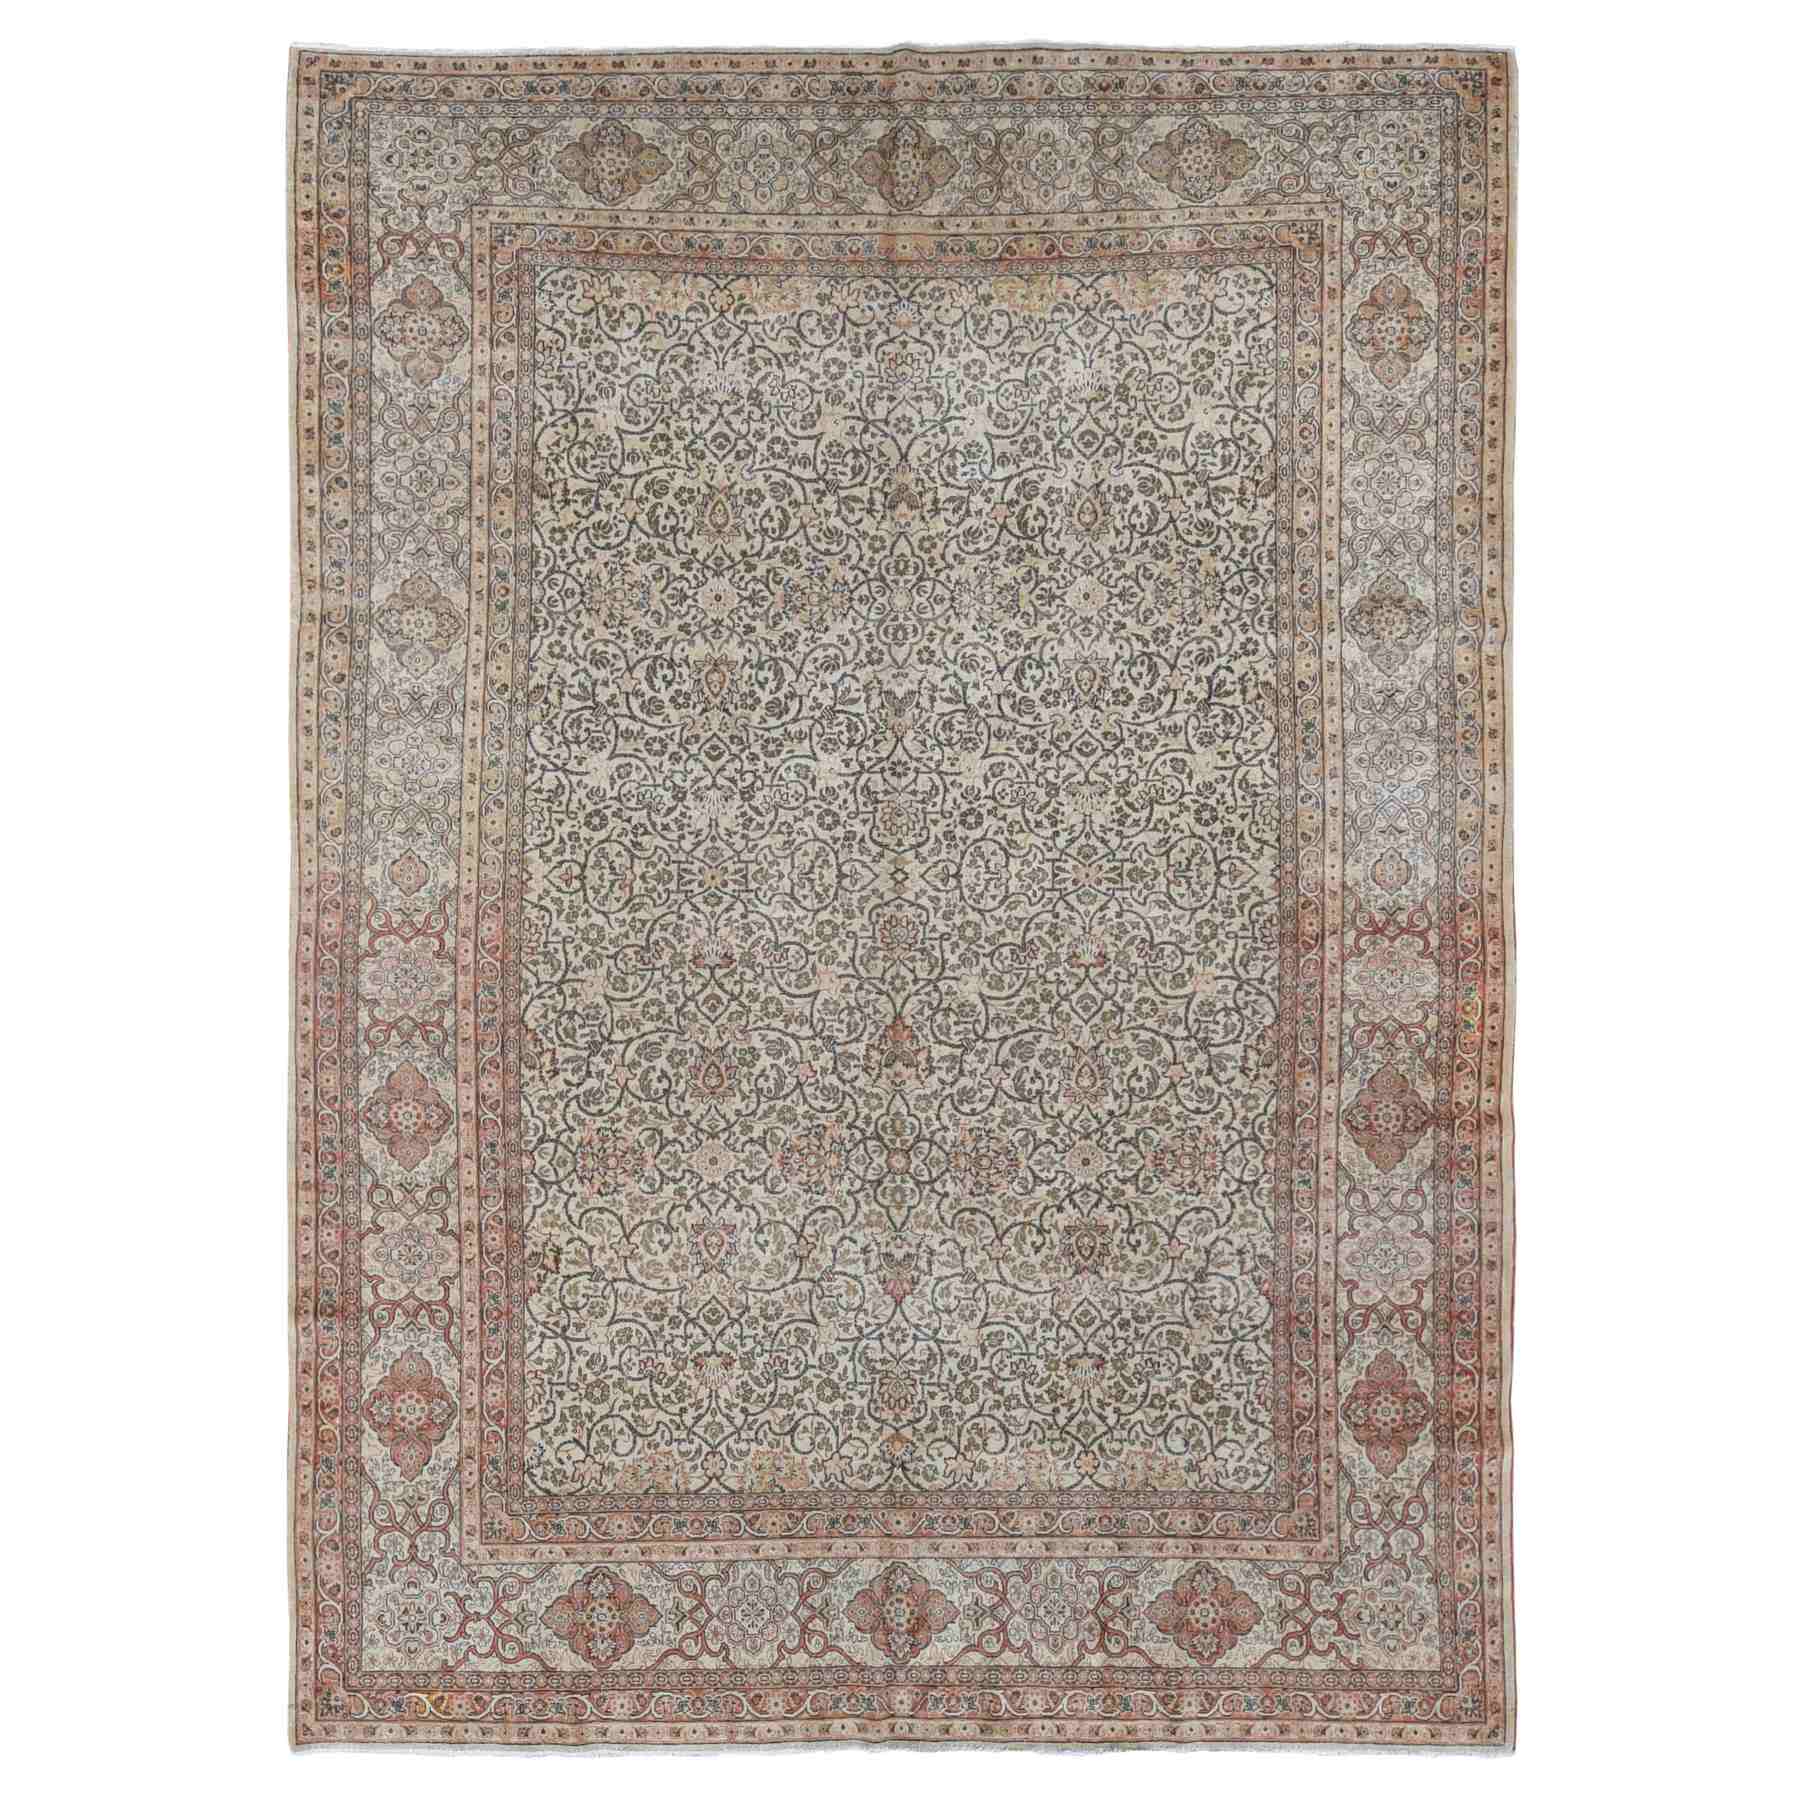 Antique-Hand-Knotted-Rug-402945